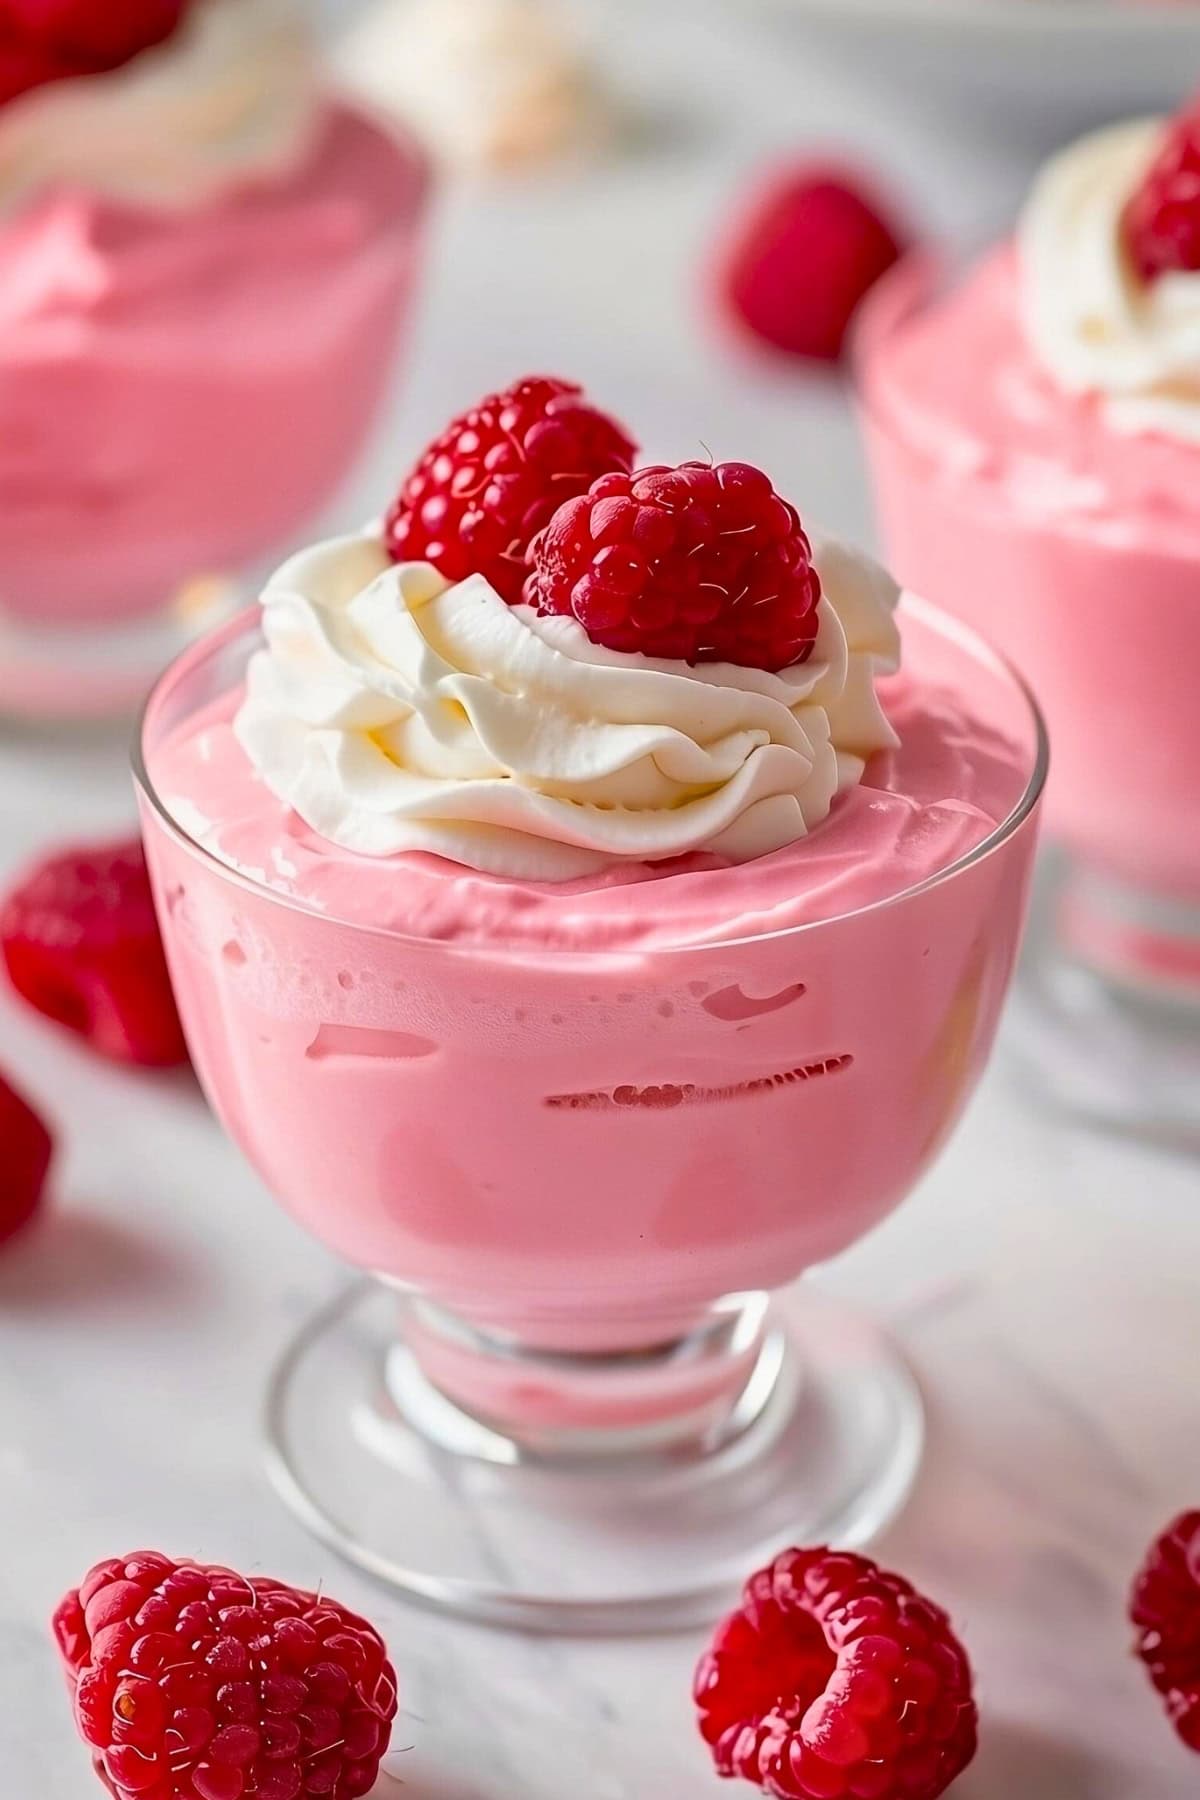 Raspberry mousse with whipped cream and raspberries on top.